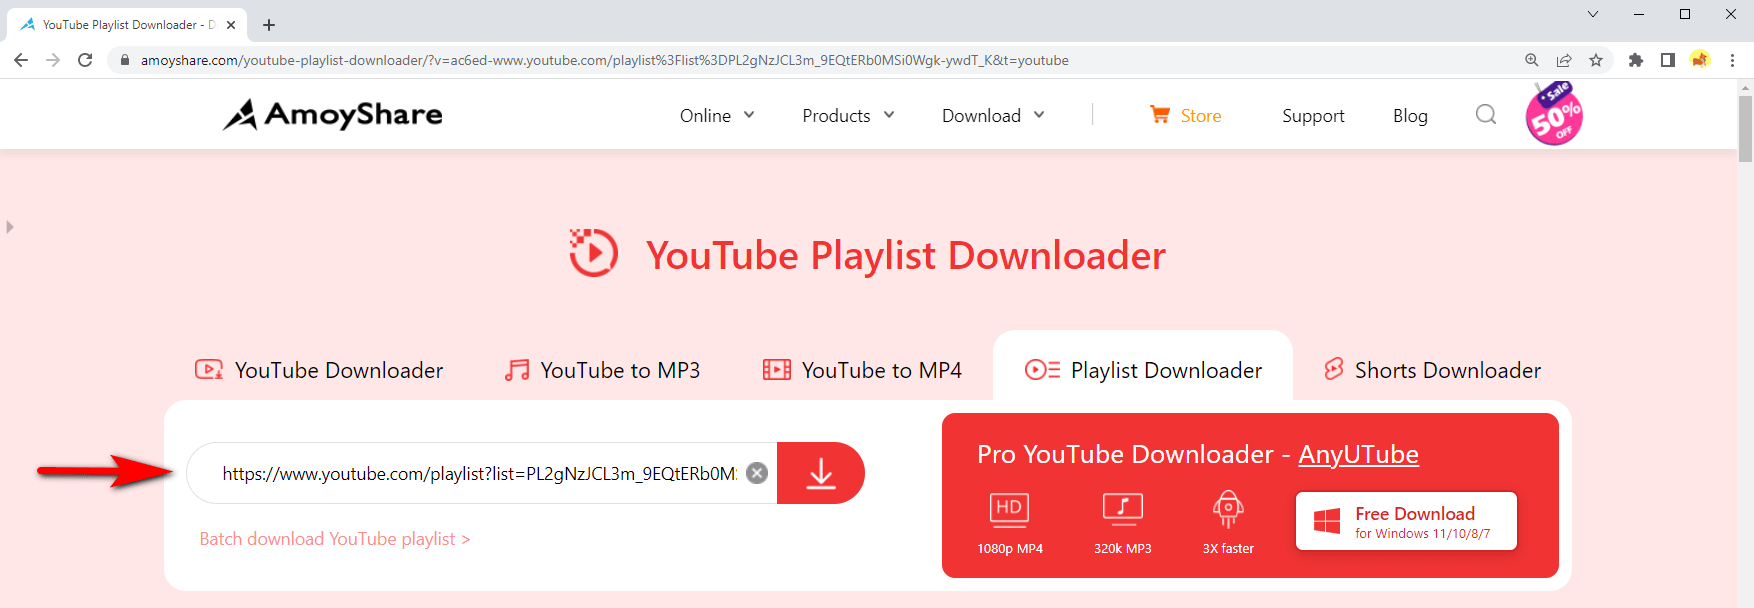 Paste the playlist URL into the search bar